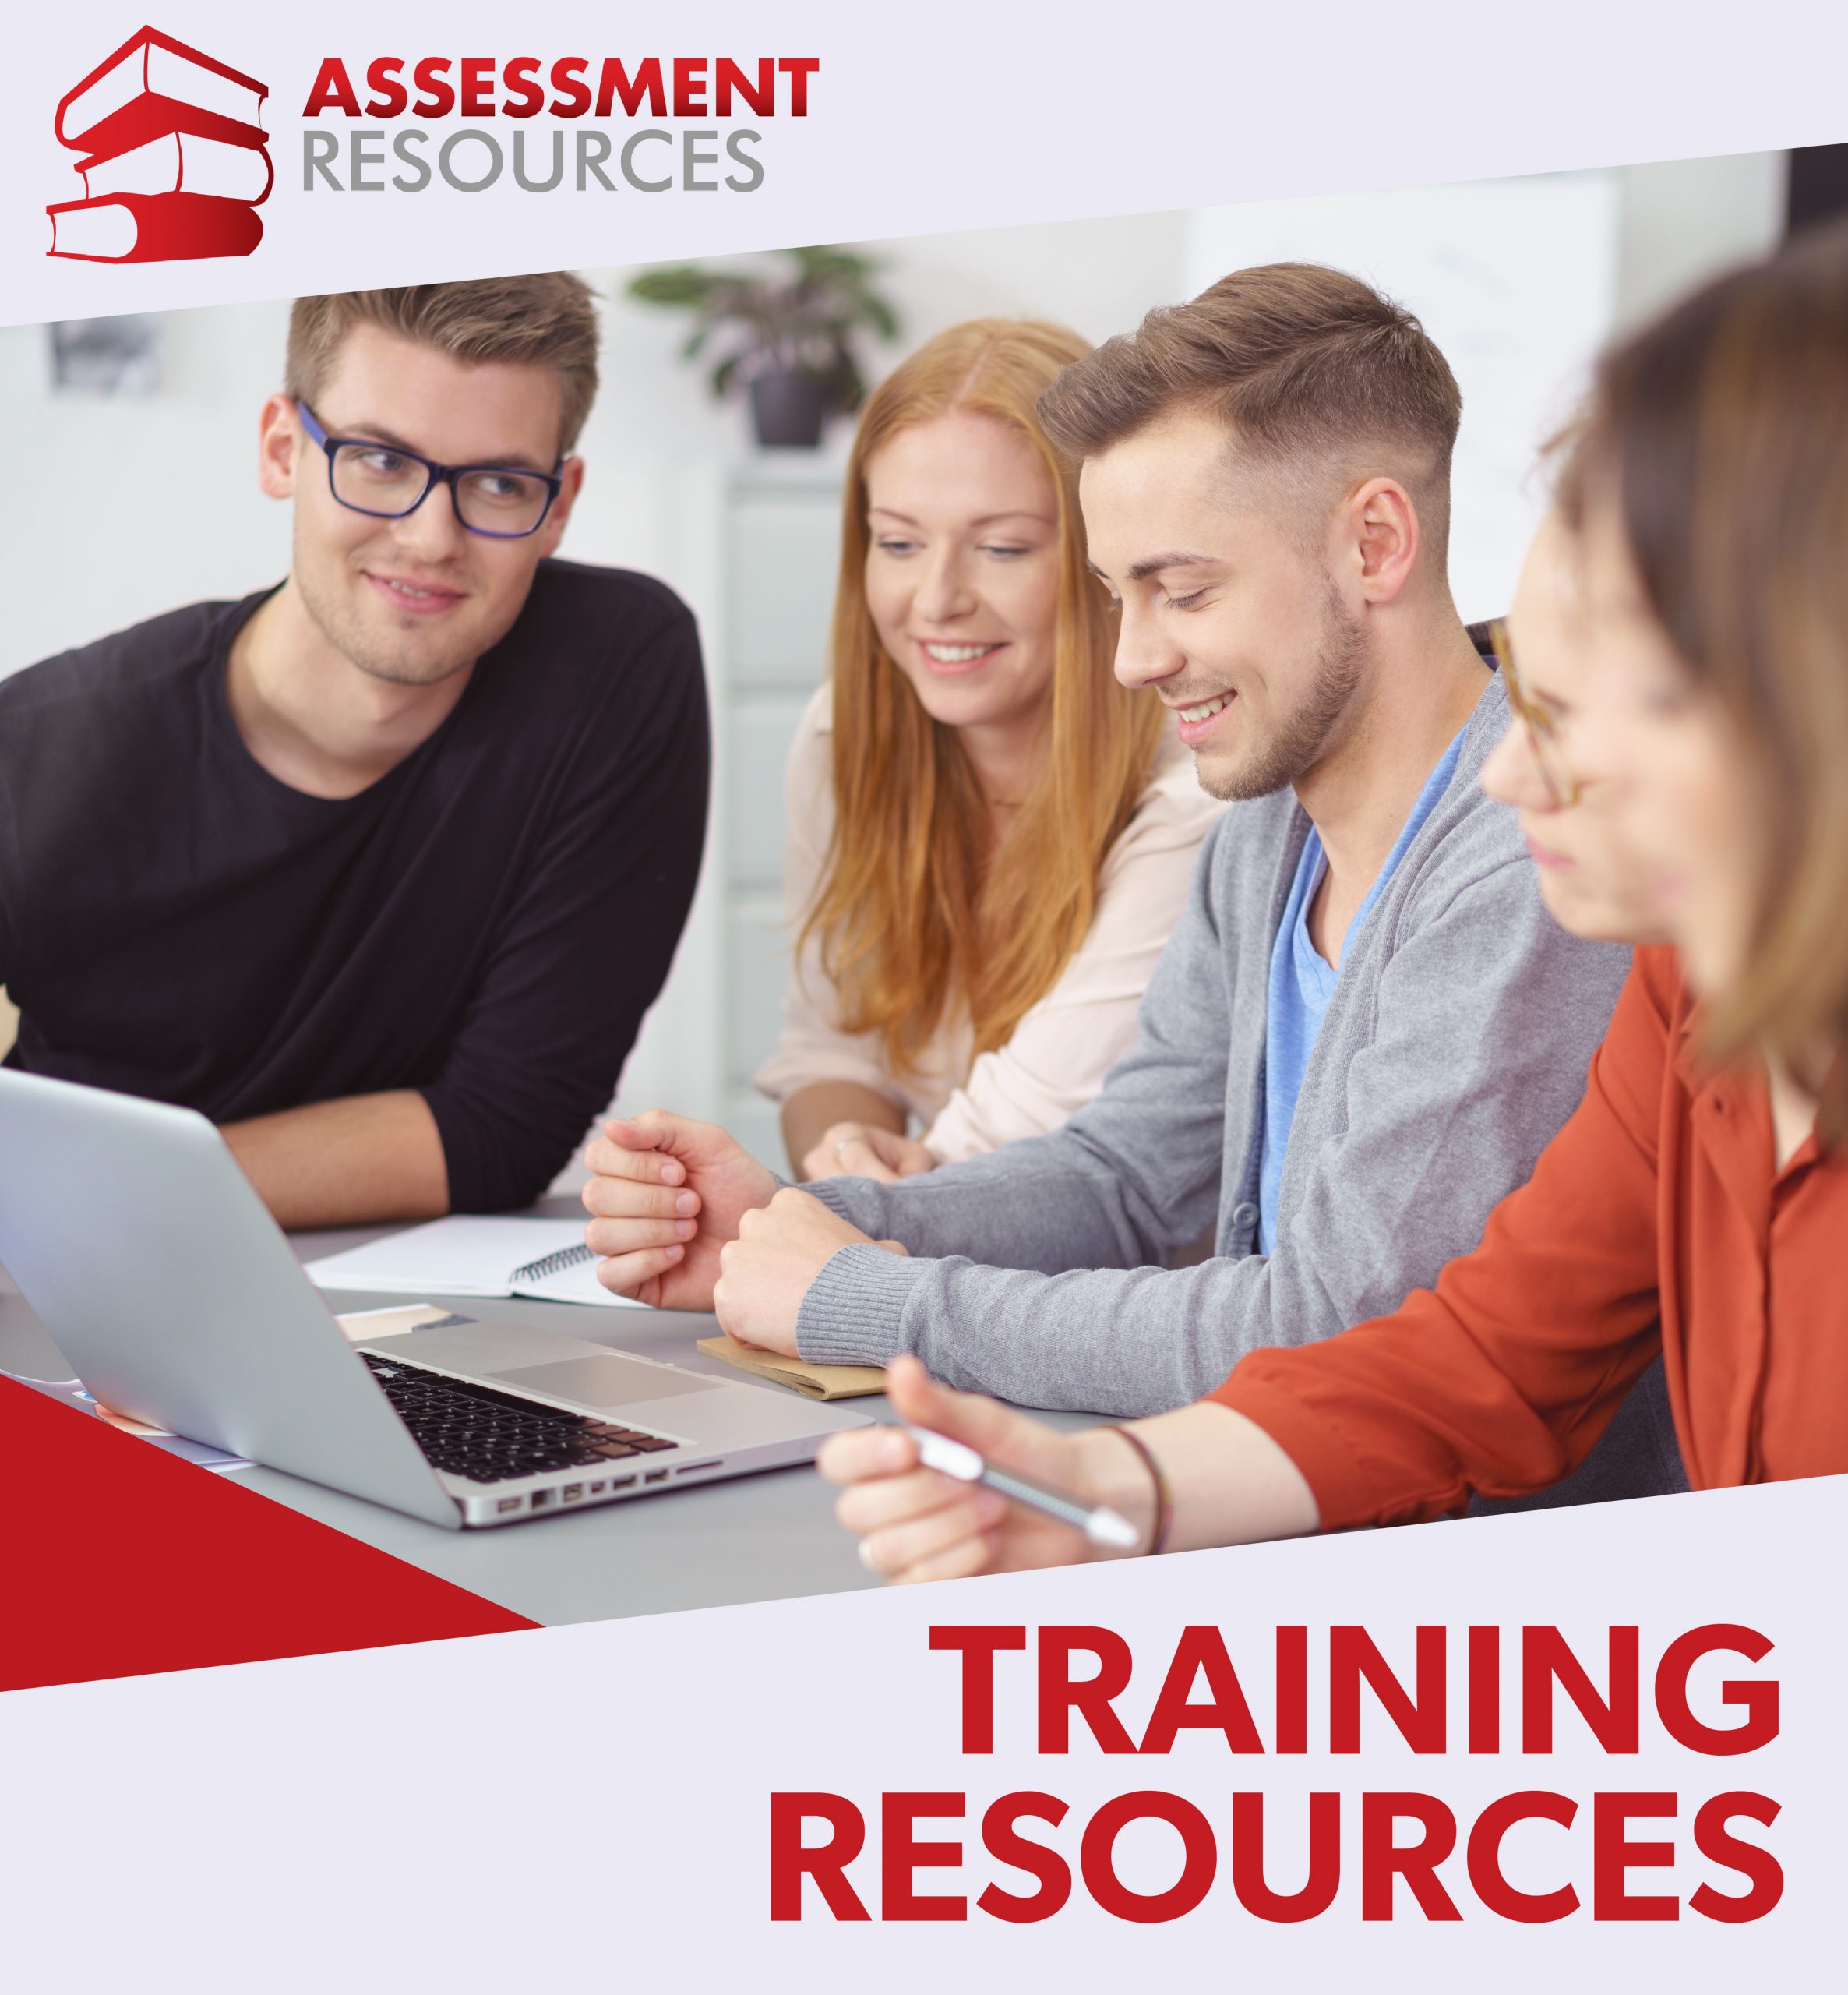 Assessent Resources Training Resources